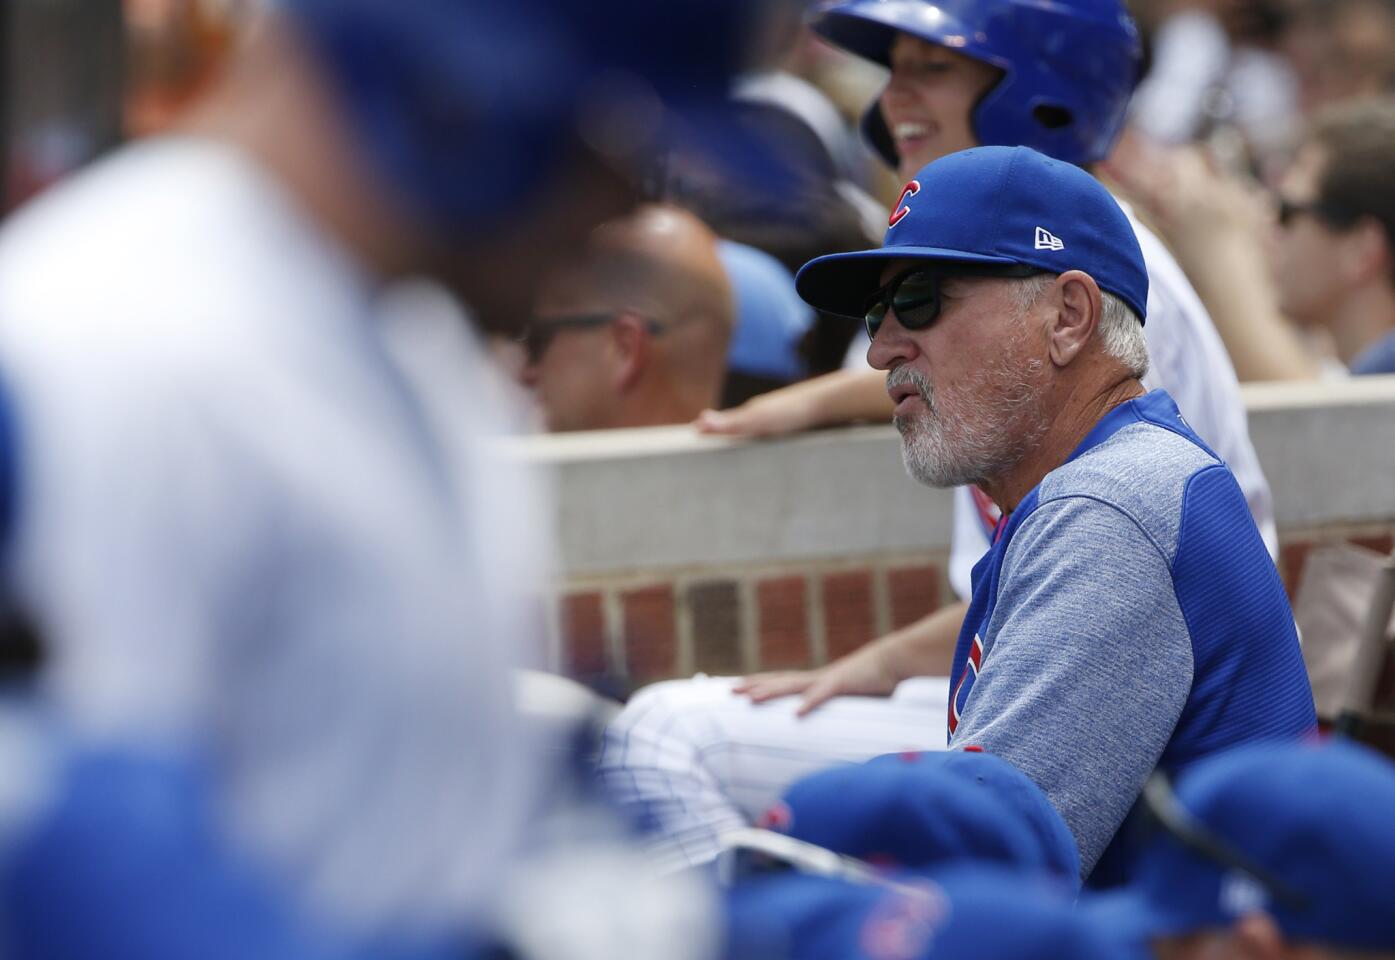 Cubs manager Joe Maddon watches his team during the first inning of a game against the Cardinals on Saturday, June 3, 2017, in Chicago.